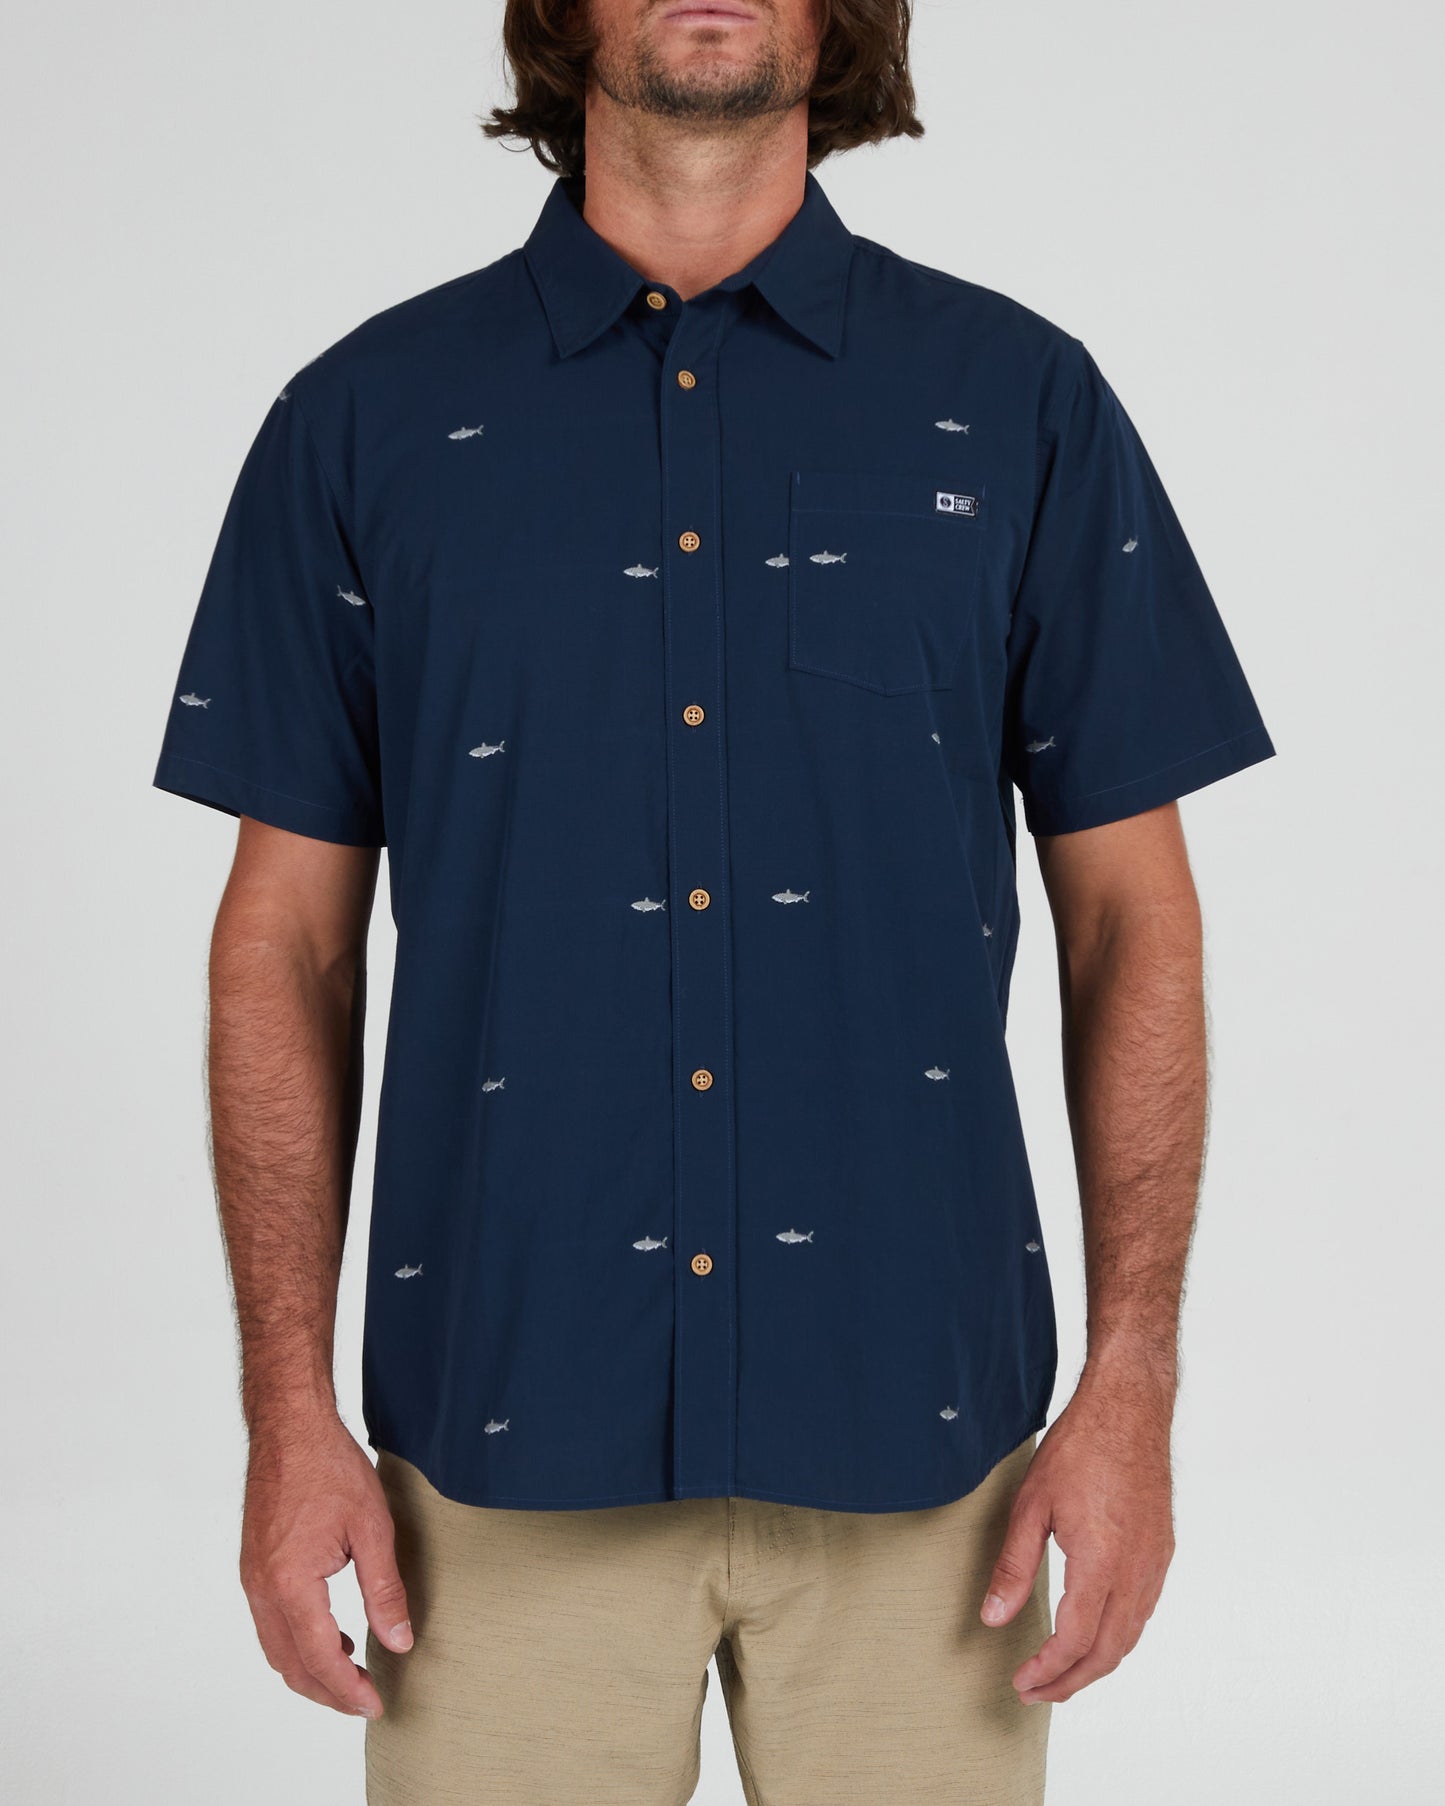 On body front of the Bruce Navy S/S Woven